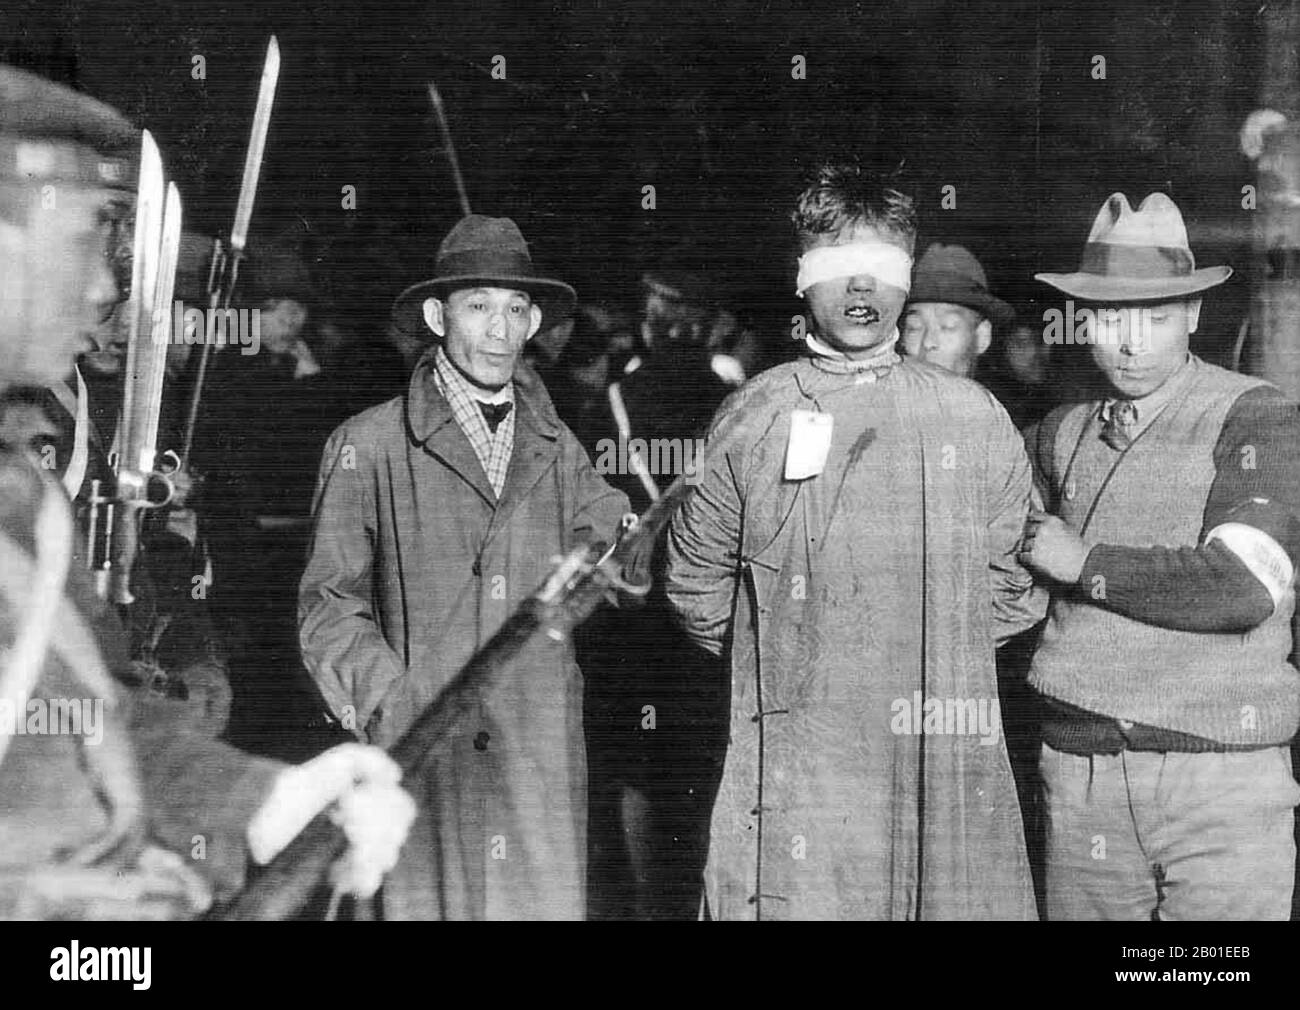 China: Chinese patriot held by Japanese agents, Zhabei, Shanghai, 1932.   A note in Chinese attached to the photograph records that the prisoner was murdered immediately after the photograph was taken.  The January 28 Incident (28 January 28 - 3 March 1932) was a short war between the armies of the Republic of China and the Empire of Japan, before official hostilities of the Second Sino-Japanese War commenced in 1937.  In Chinese literature it is known as the January 28 Incident, while in Western sources it is often called the Shanghai War of 1932 or, more simply, the Shanghai Incident. Stock Photo